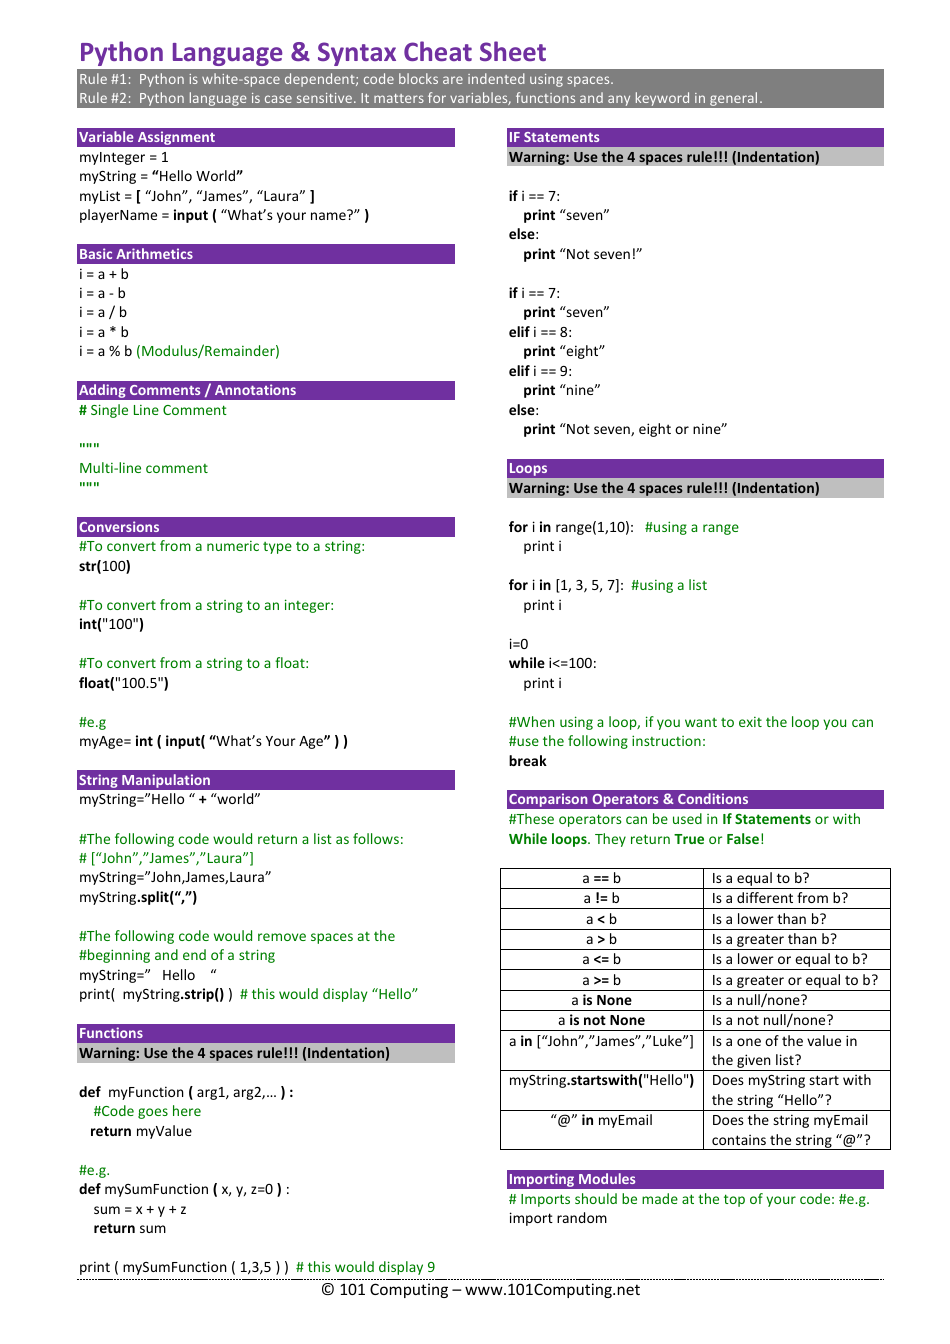 Python Language & Syntax Cheat Sheet Preview